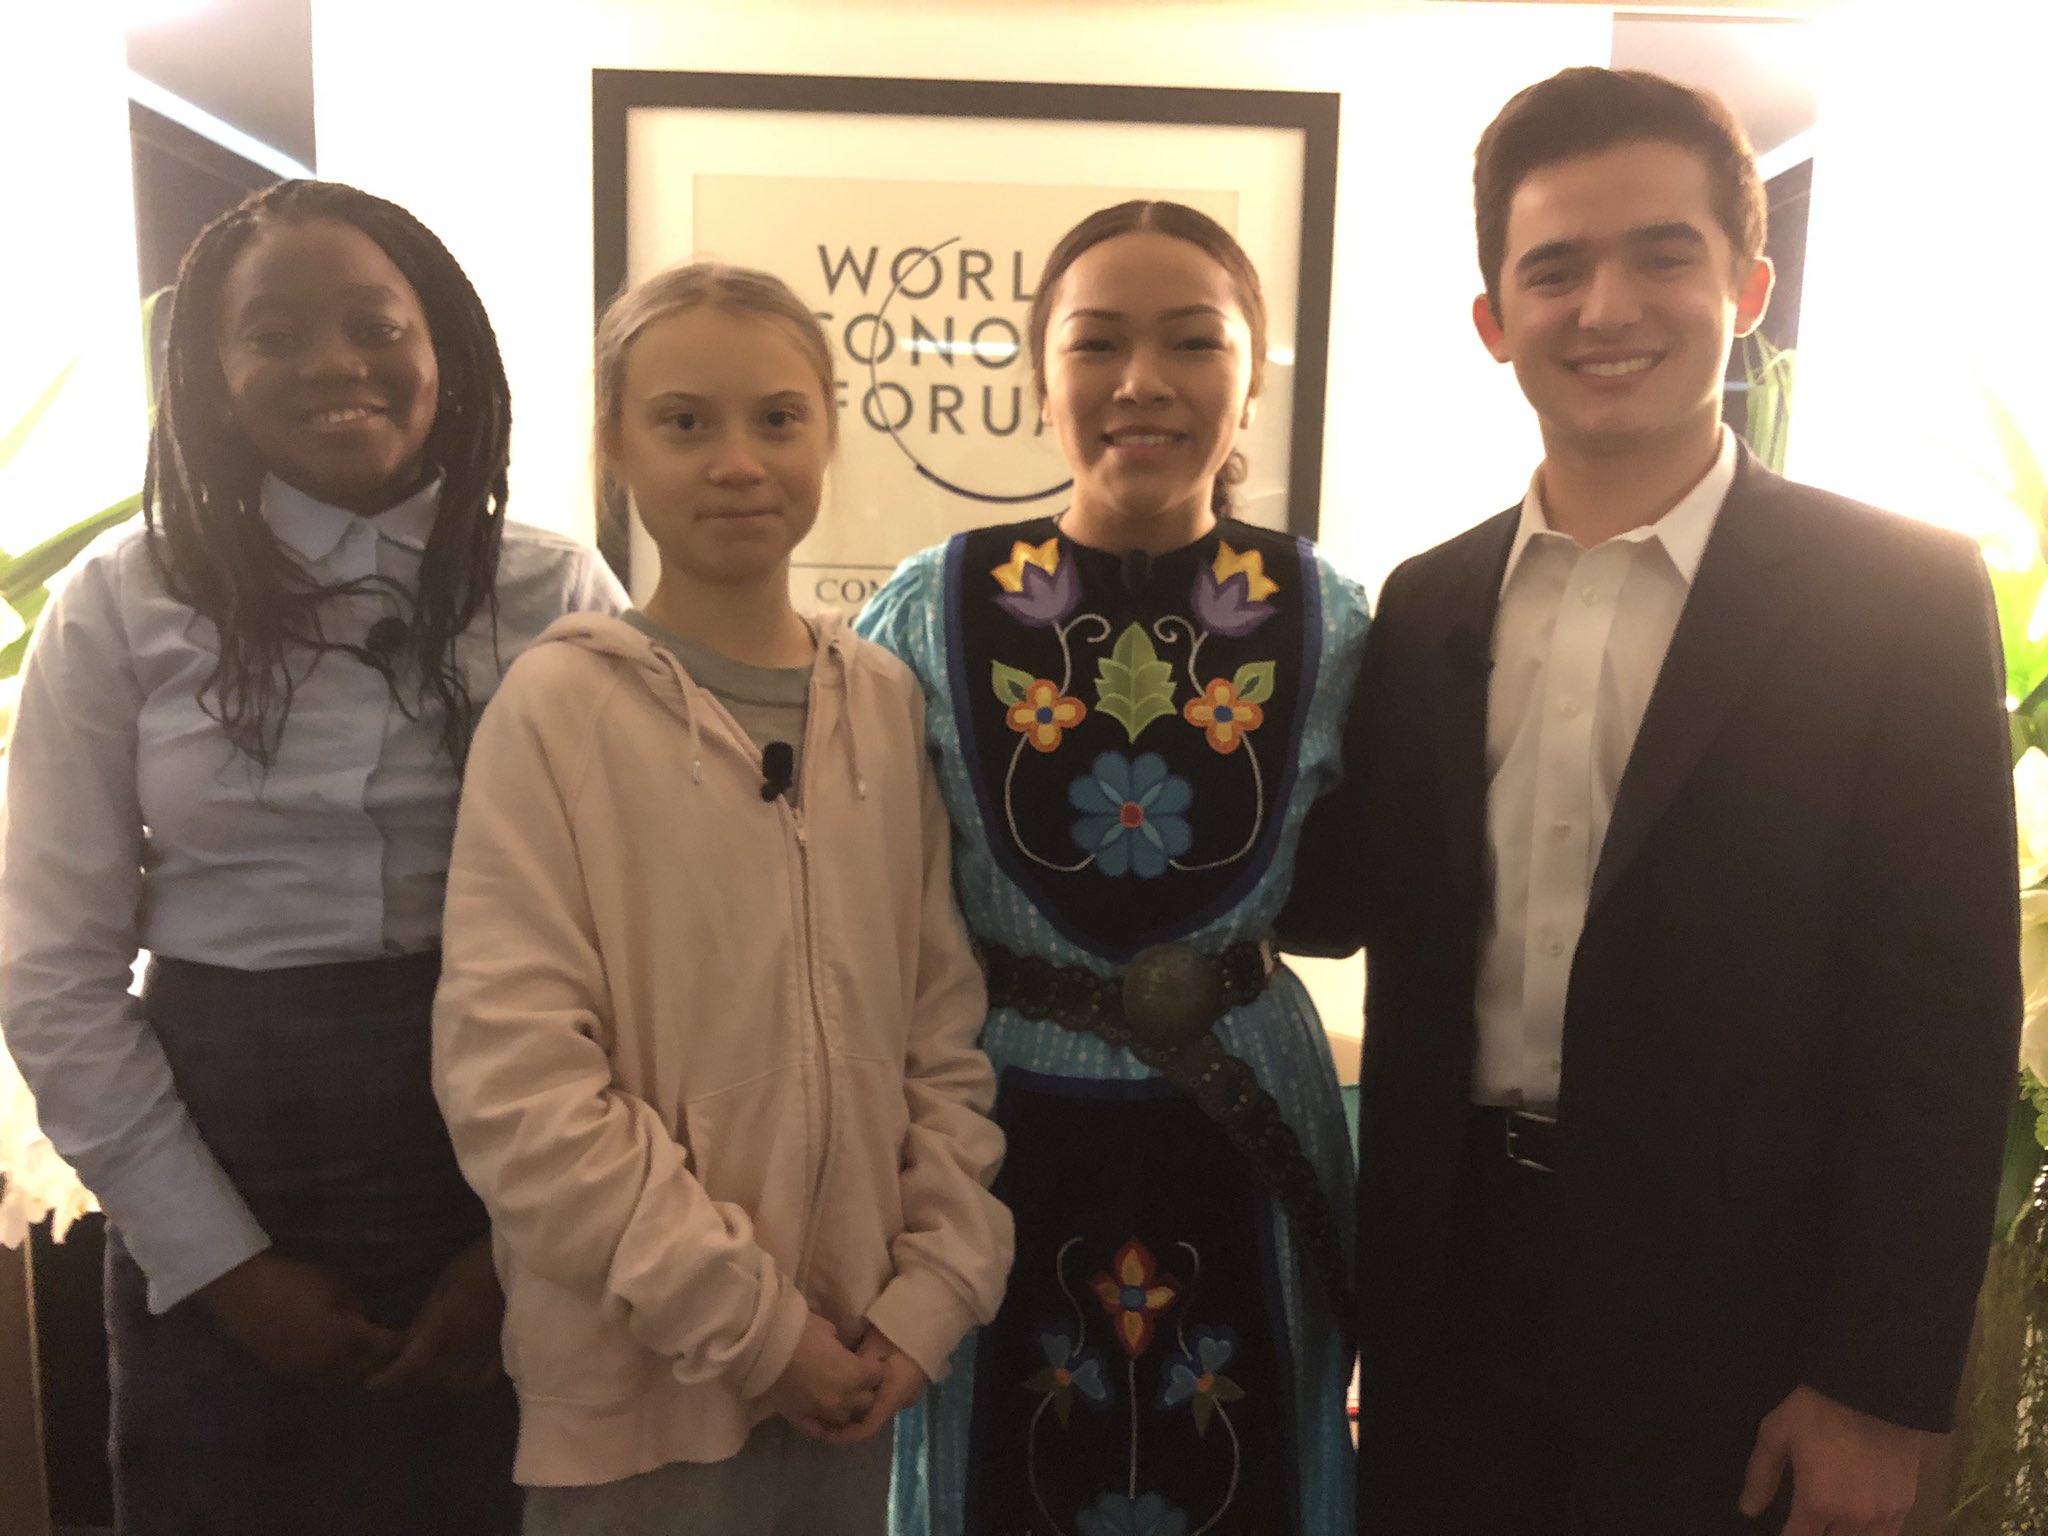 DAVOS-Greta Thunberg calls on world leaders to listen to young activists